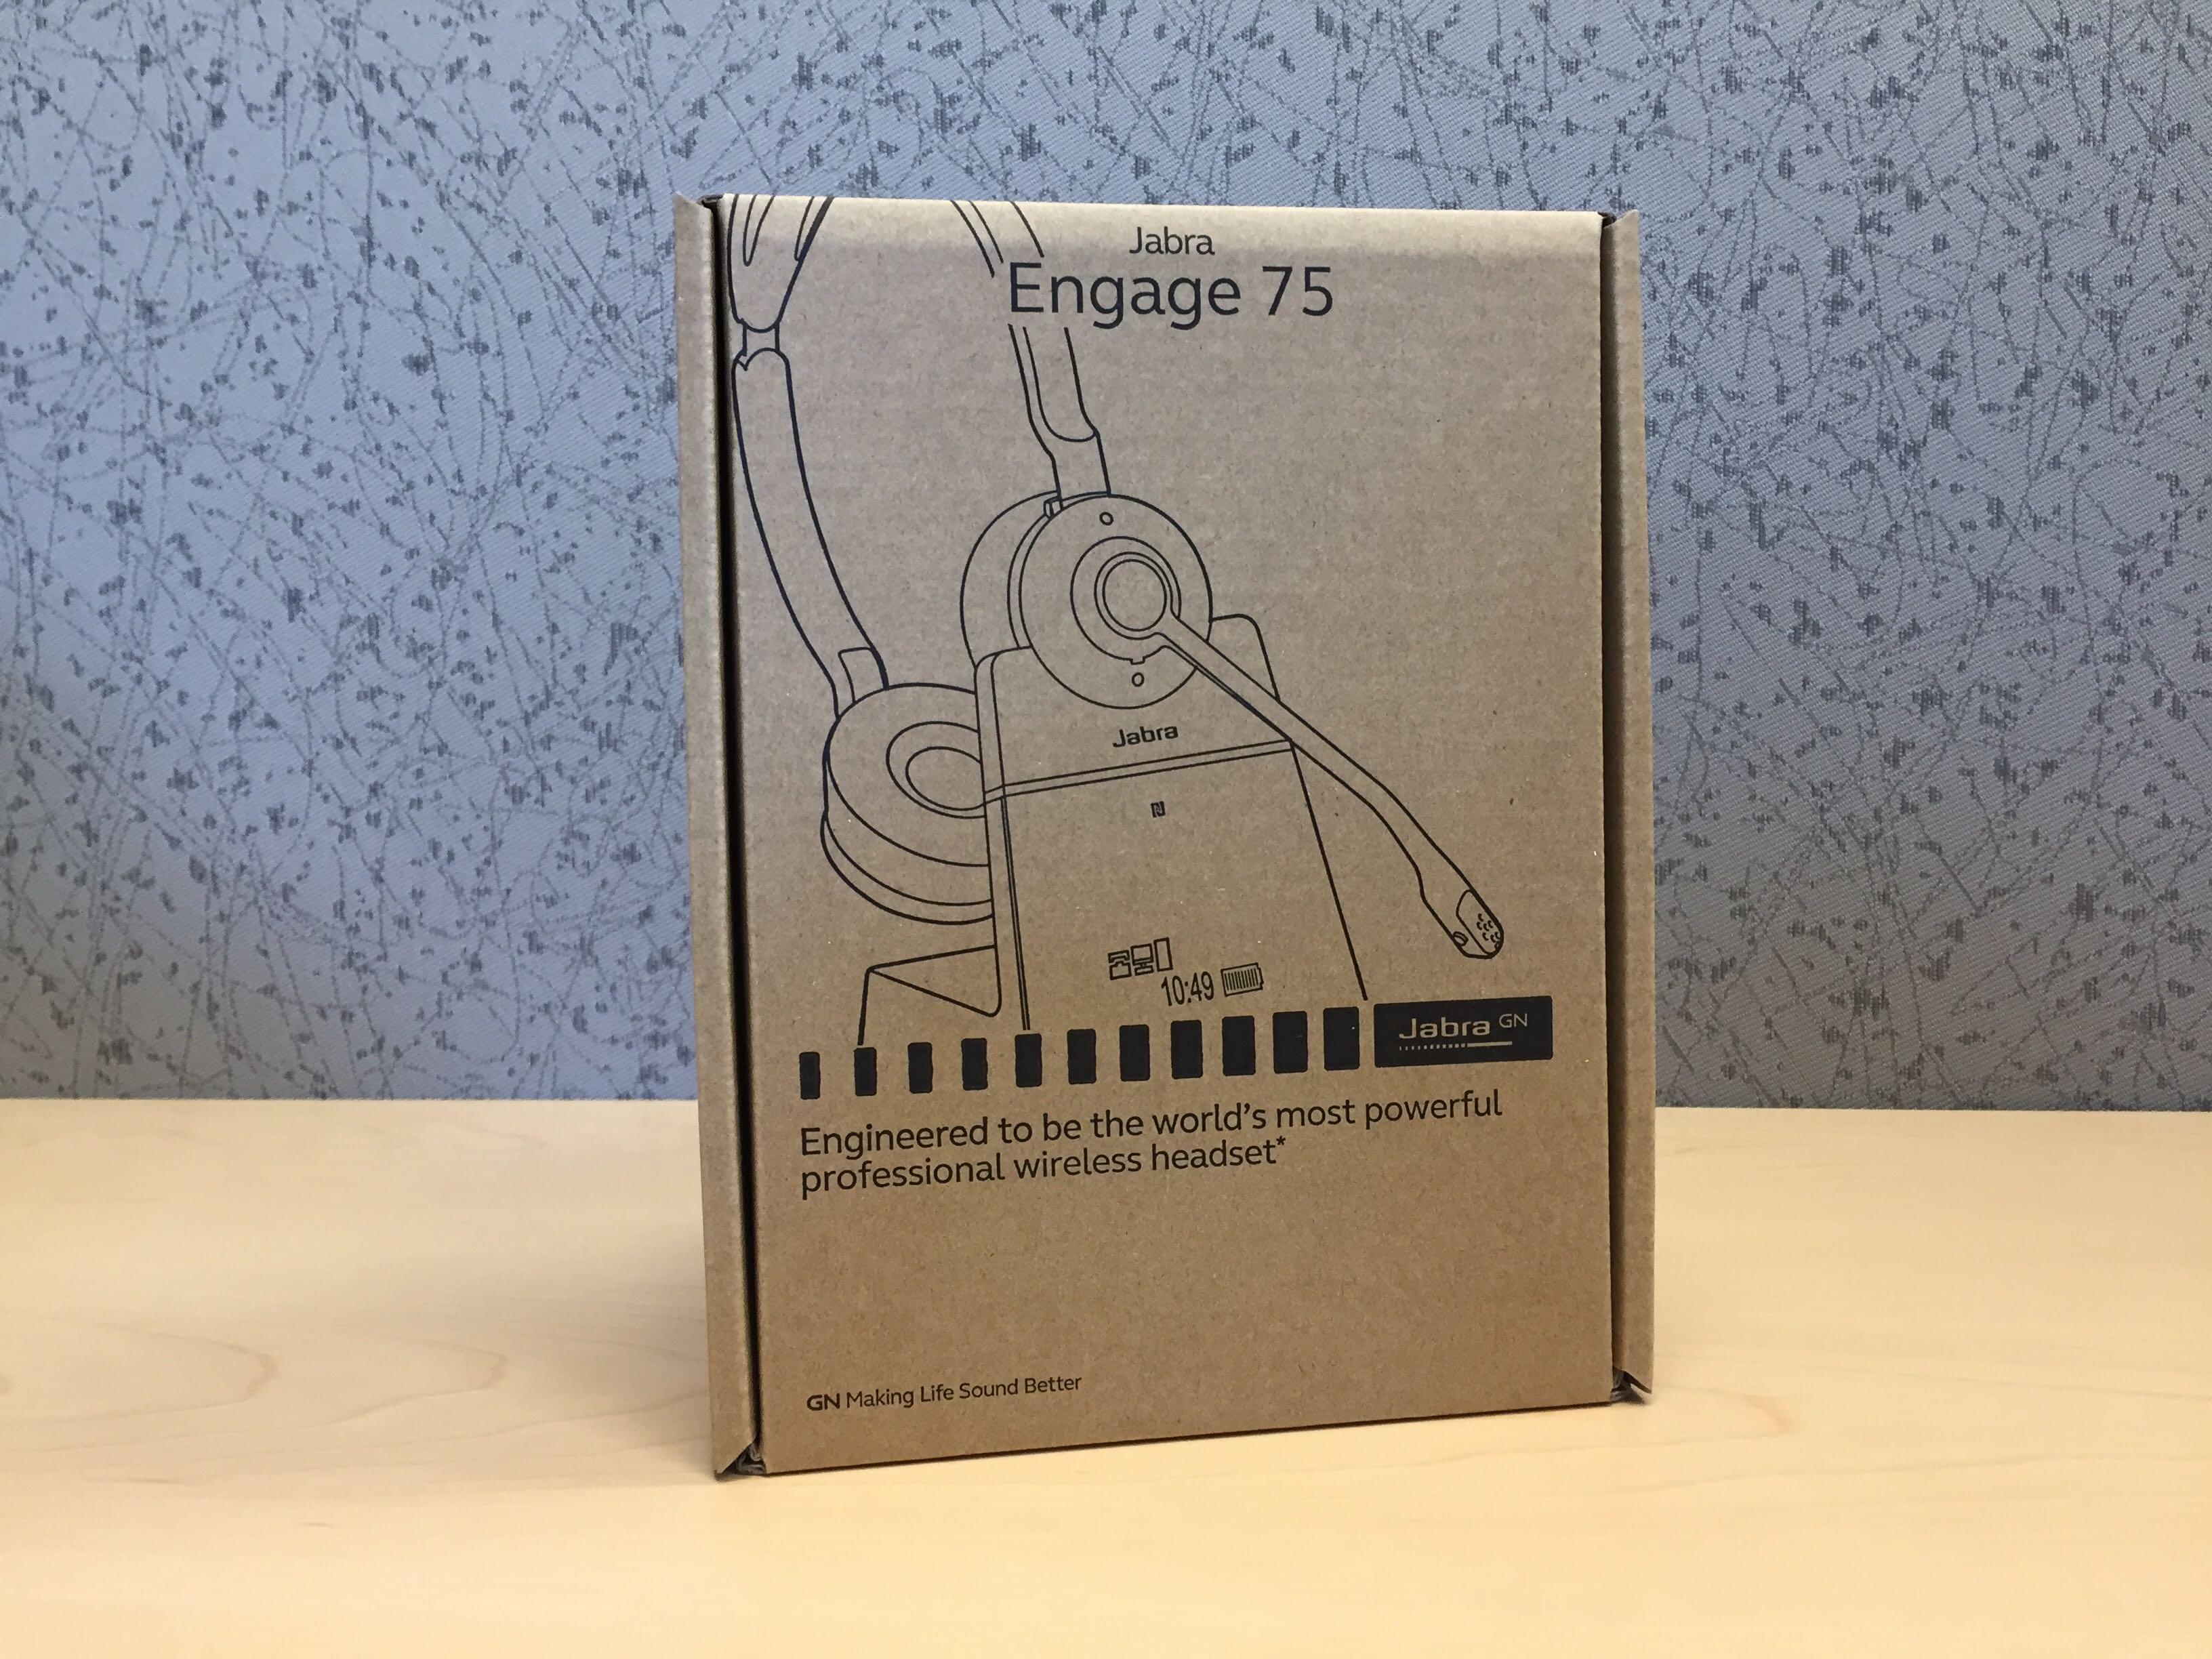 The Jabra Engage 75 Headset: A Hands-On Review of Features